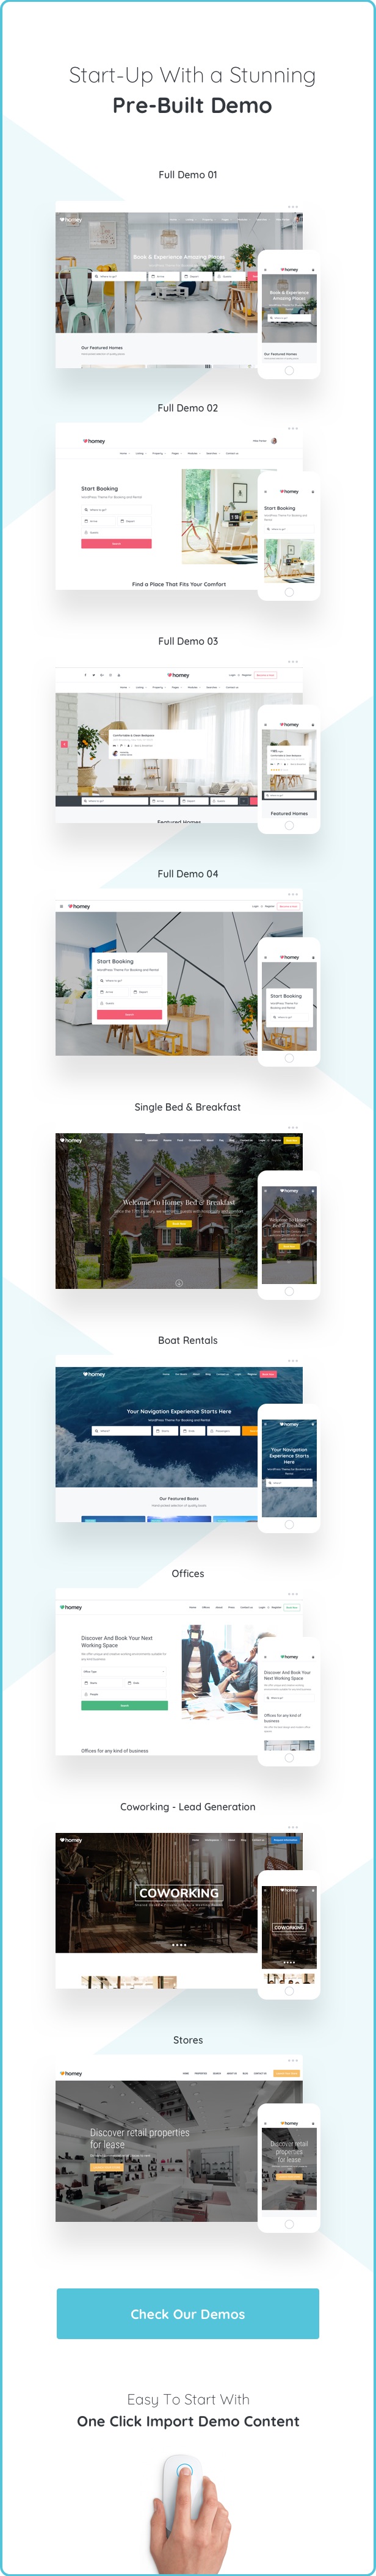 Homey - Booking and Rentals WordPress Theme - 6